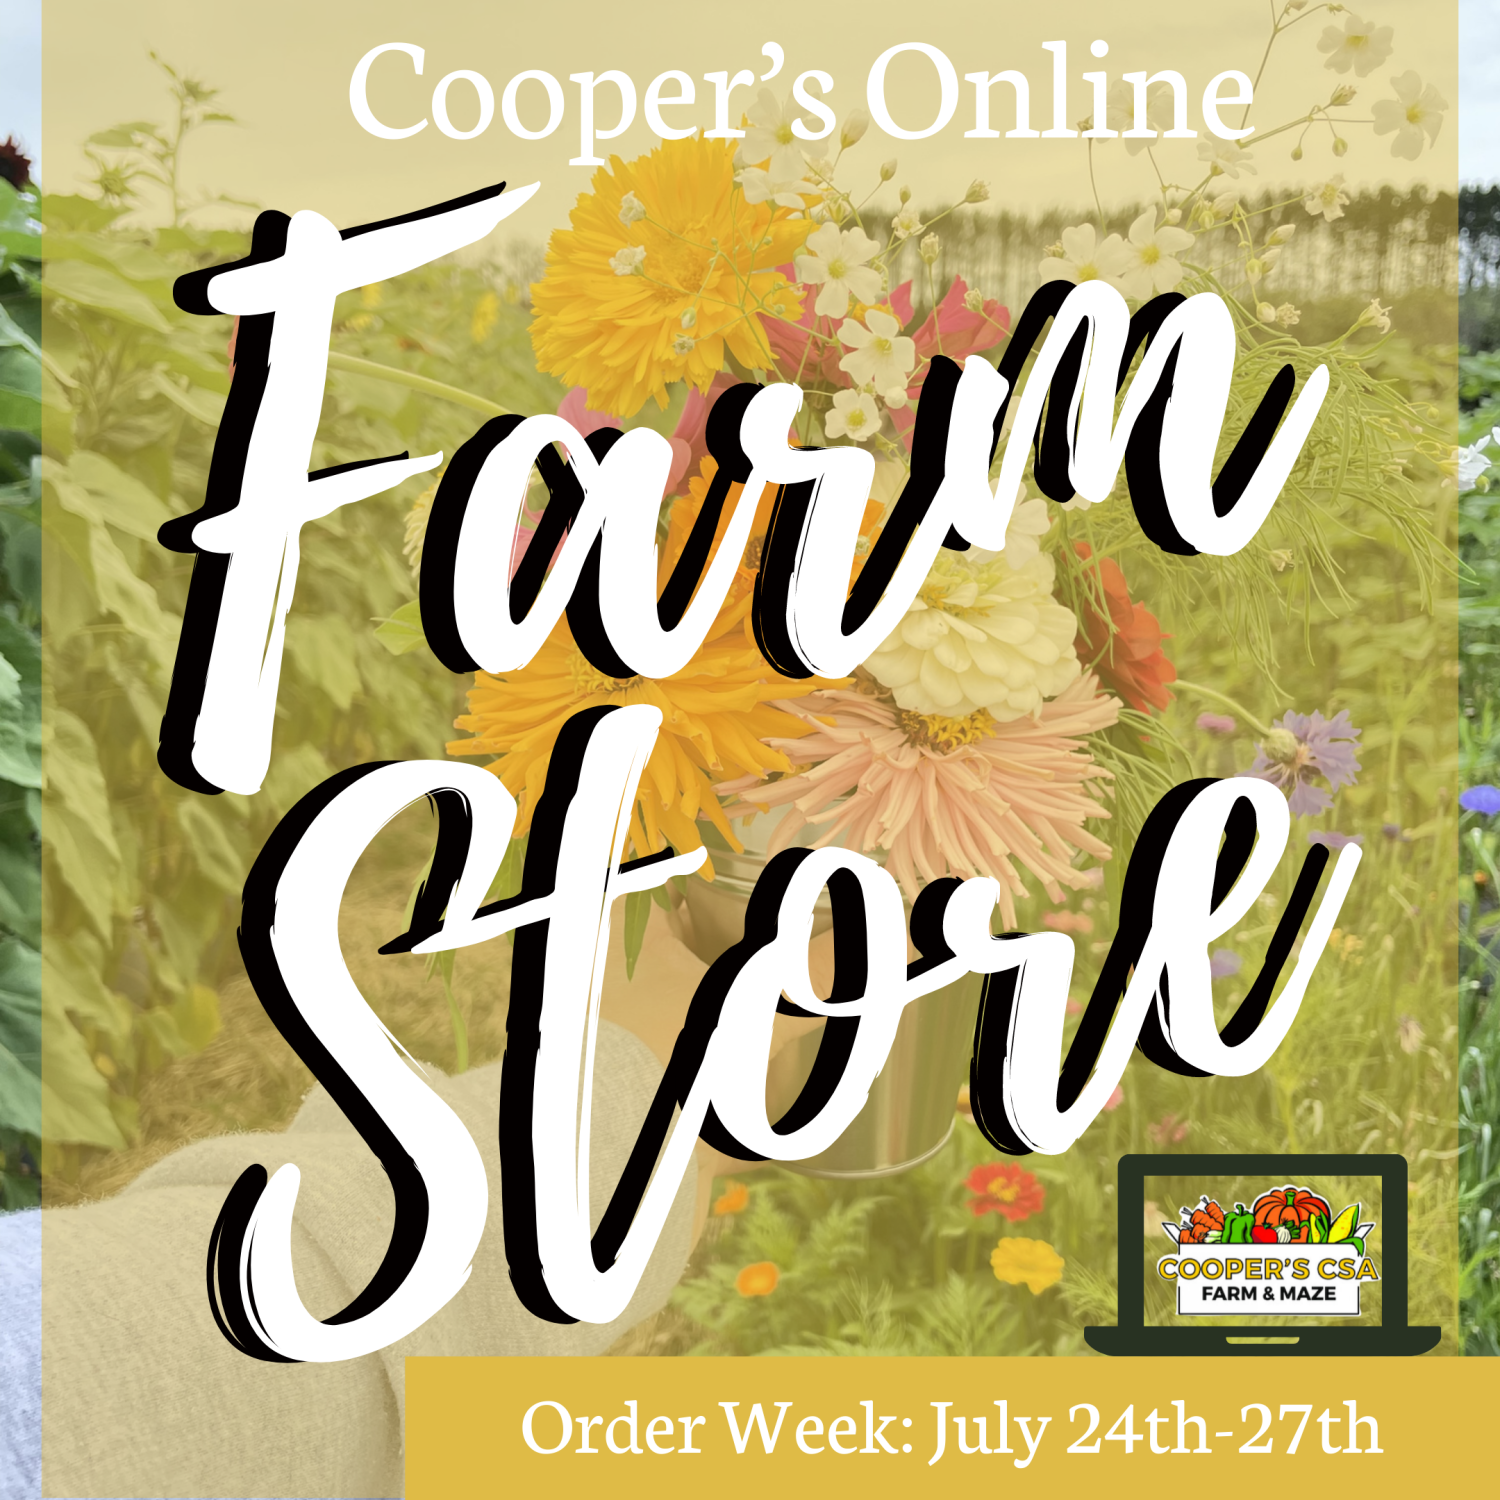 Coopers CSA Online FarmStore- Order week July 24th-27th